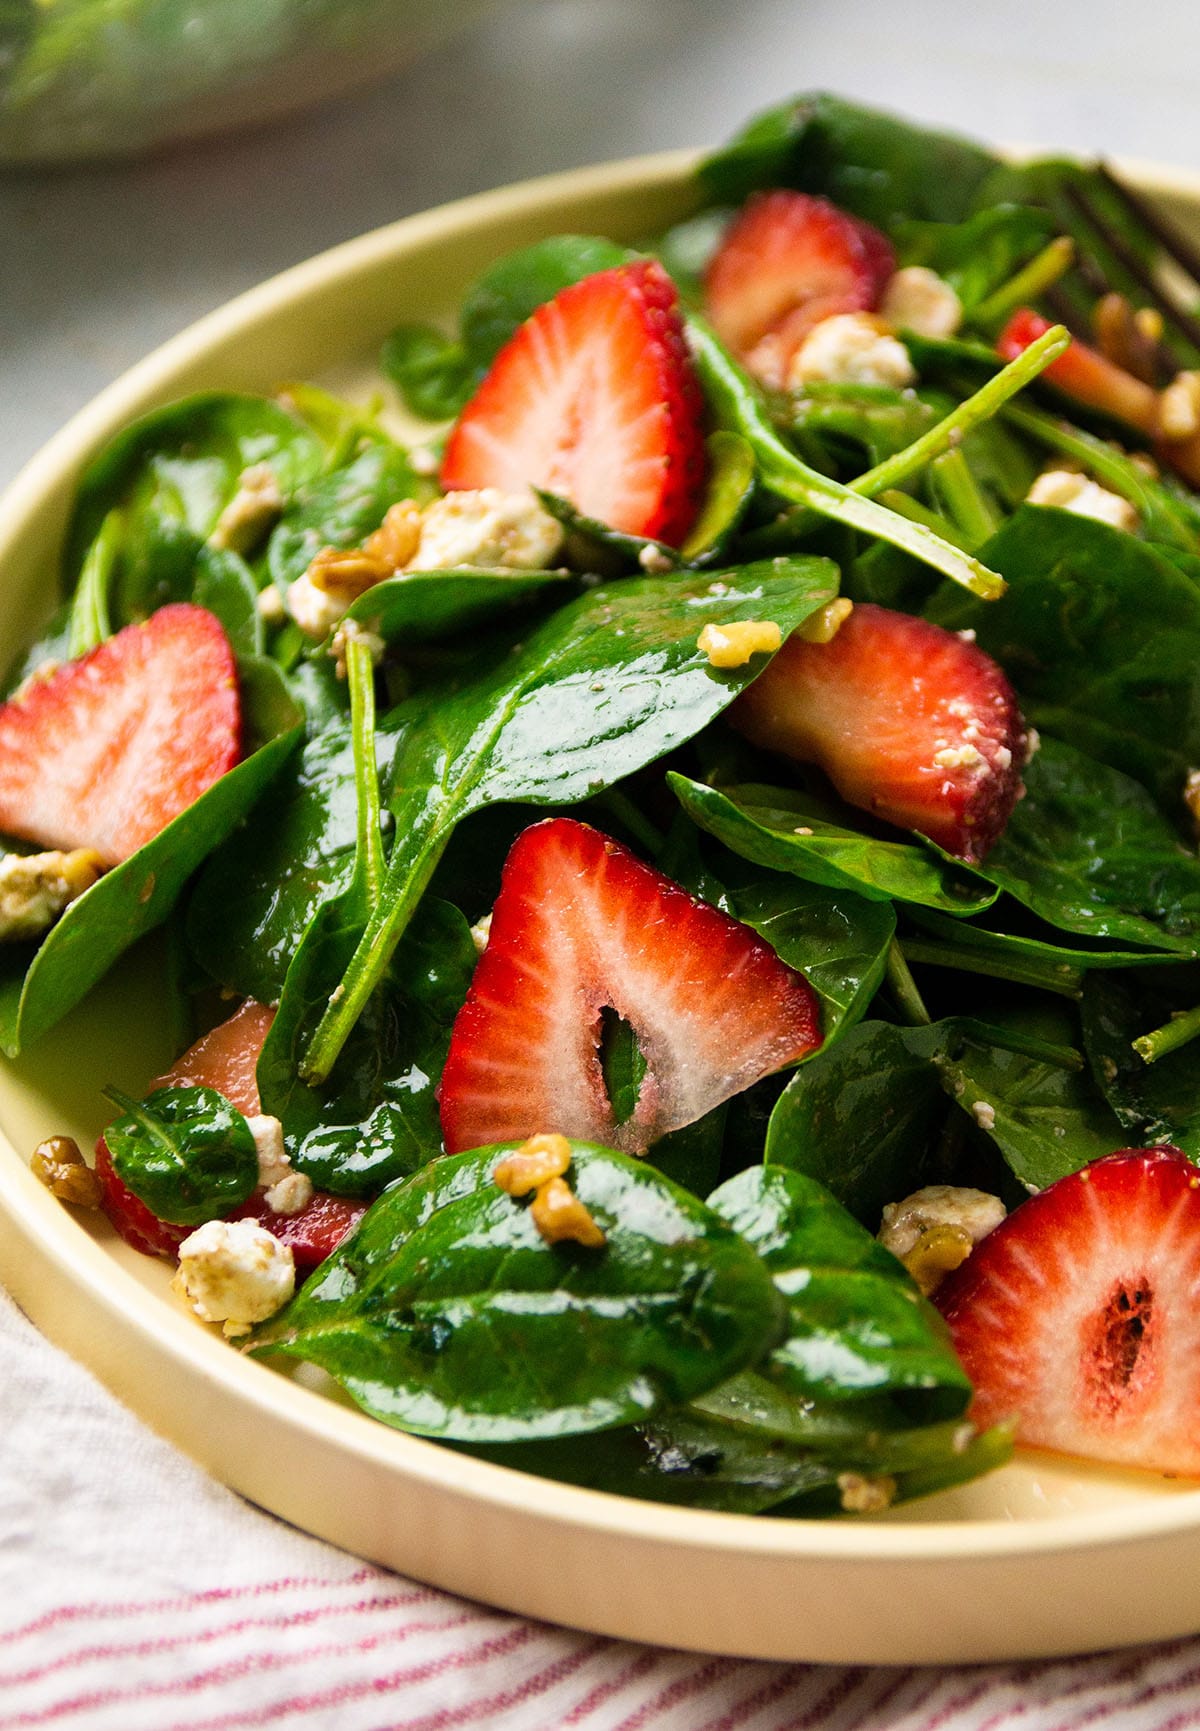 Strawberry spinach salad on a yellow plate.